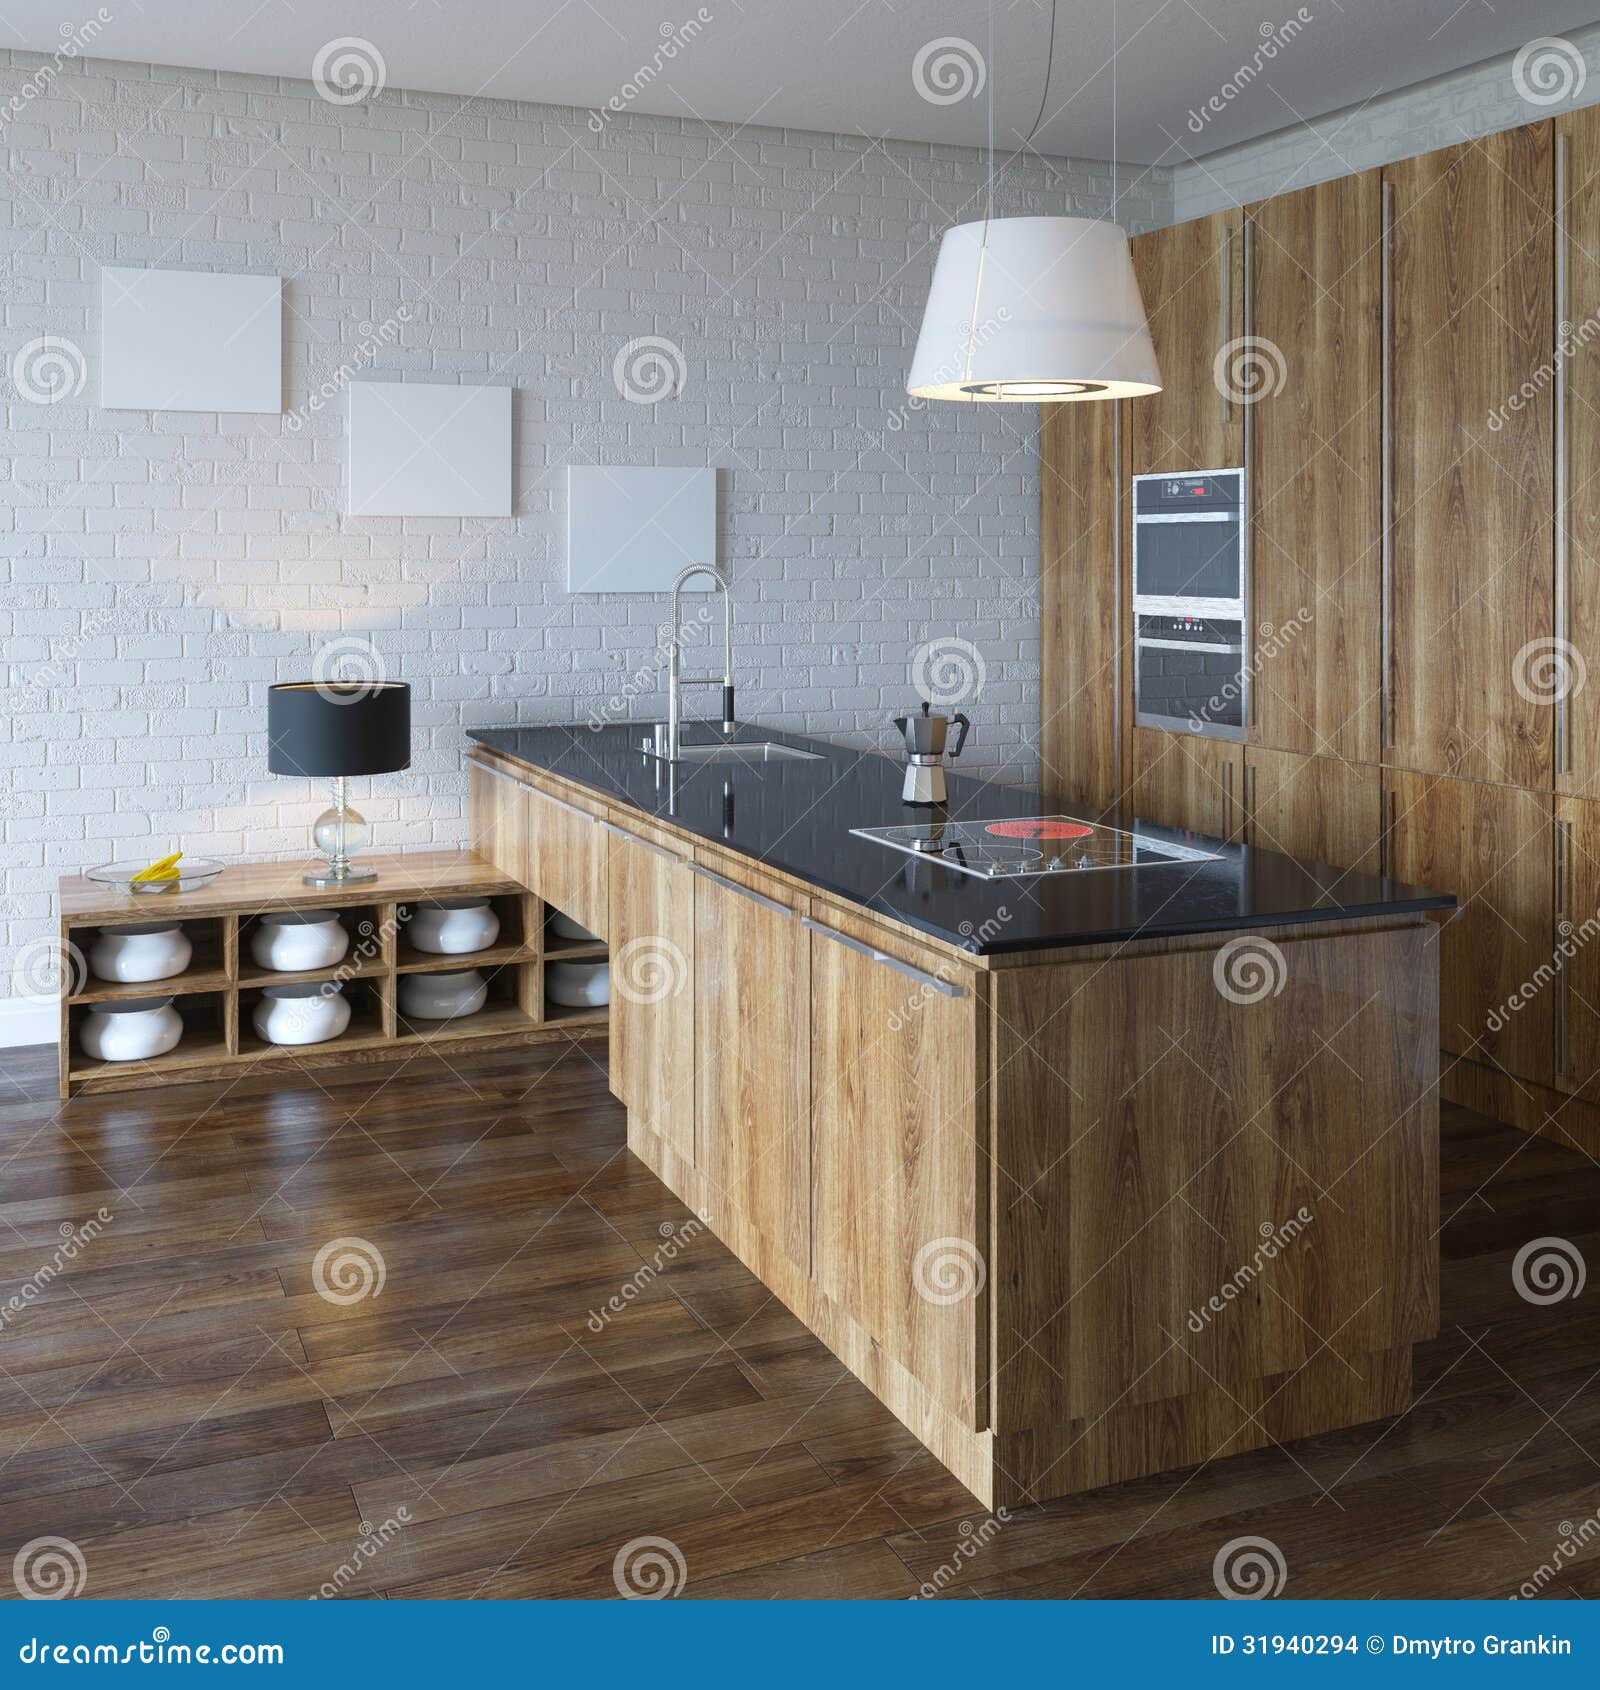 https://thumbs.dreamstime.com/z/luxury-kitchen-cabinet-wooden-furniture-perspective-view-31940294.jpg